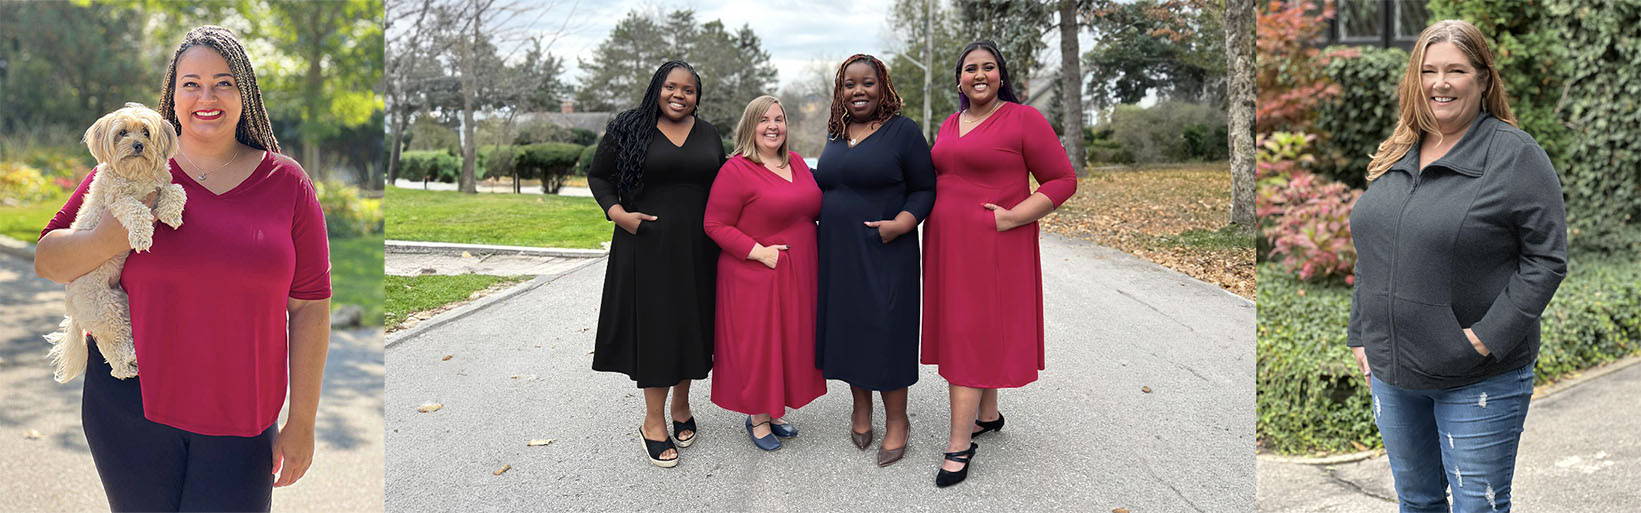 3 images of Miik plus size models wearing the new Canadian plus size collection